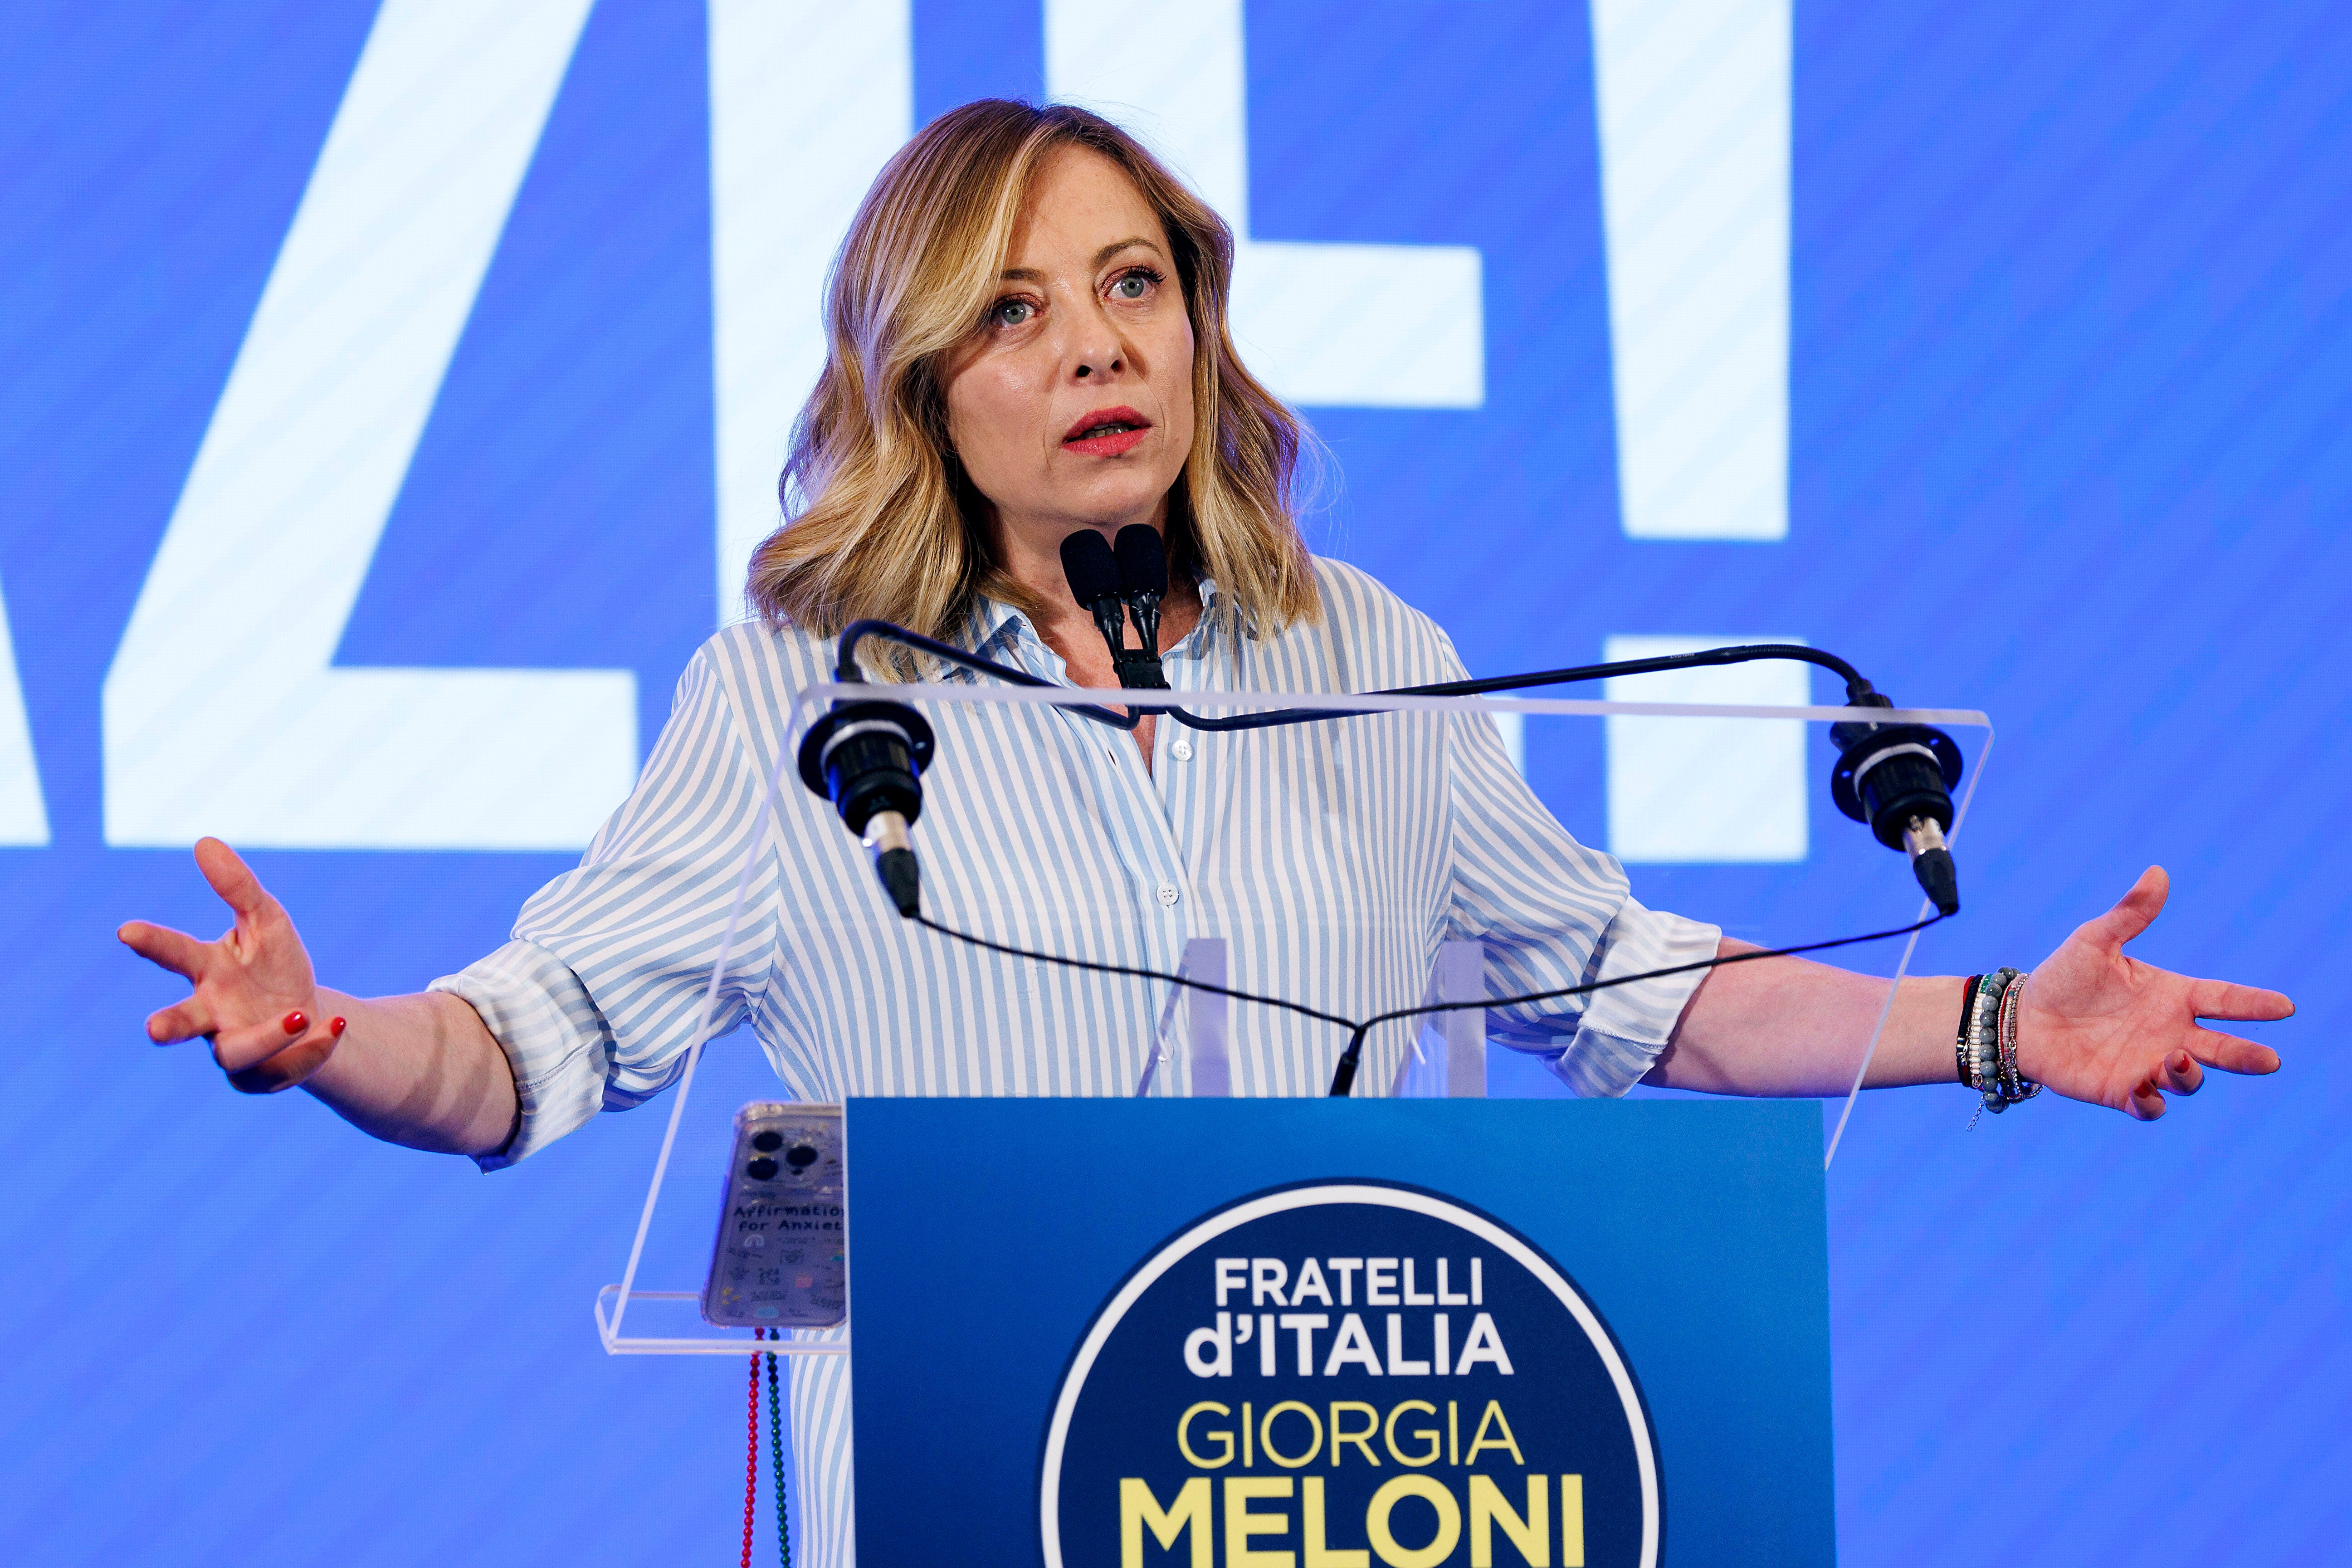 Italy is led by Giorgia Meloni, of the Brothers of Italy party, which won power in 2022